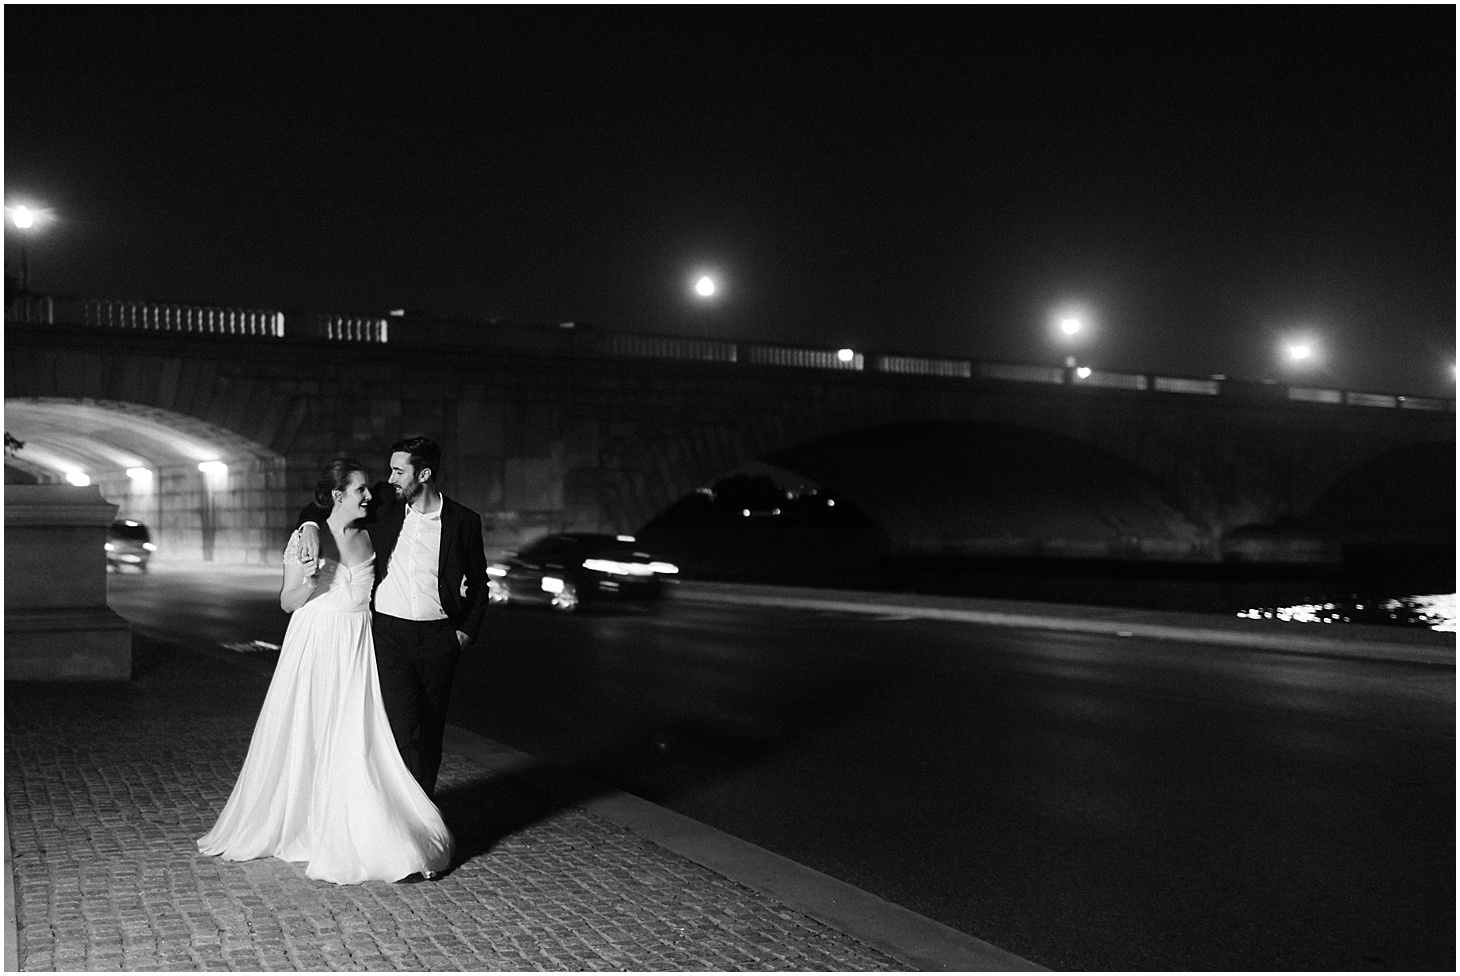 Formal Engagement Portraits at Memorial Bridge in DC, Black Tie Evening Engagement Session at Kennedy Center and Memorial Bridge, Sarah Bradshaw Photography